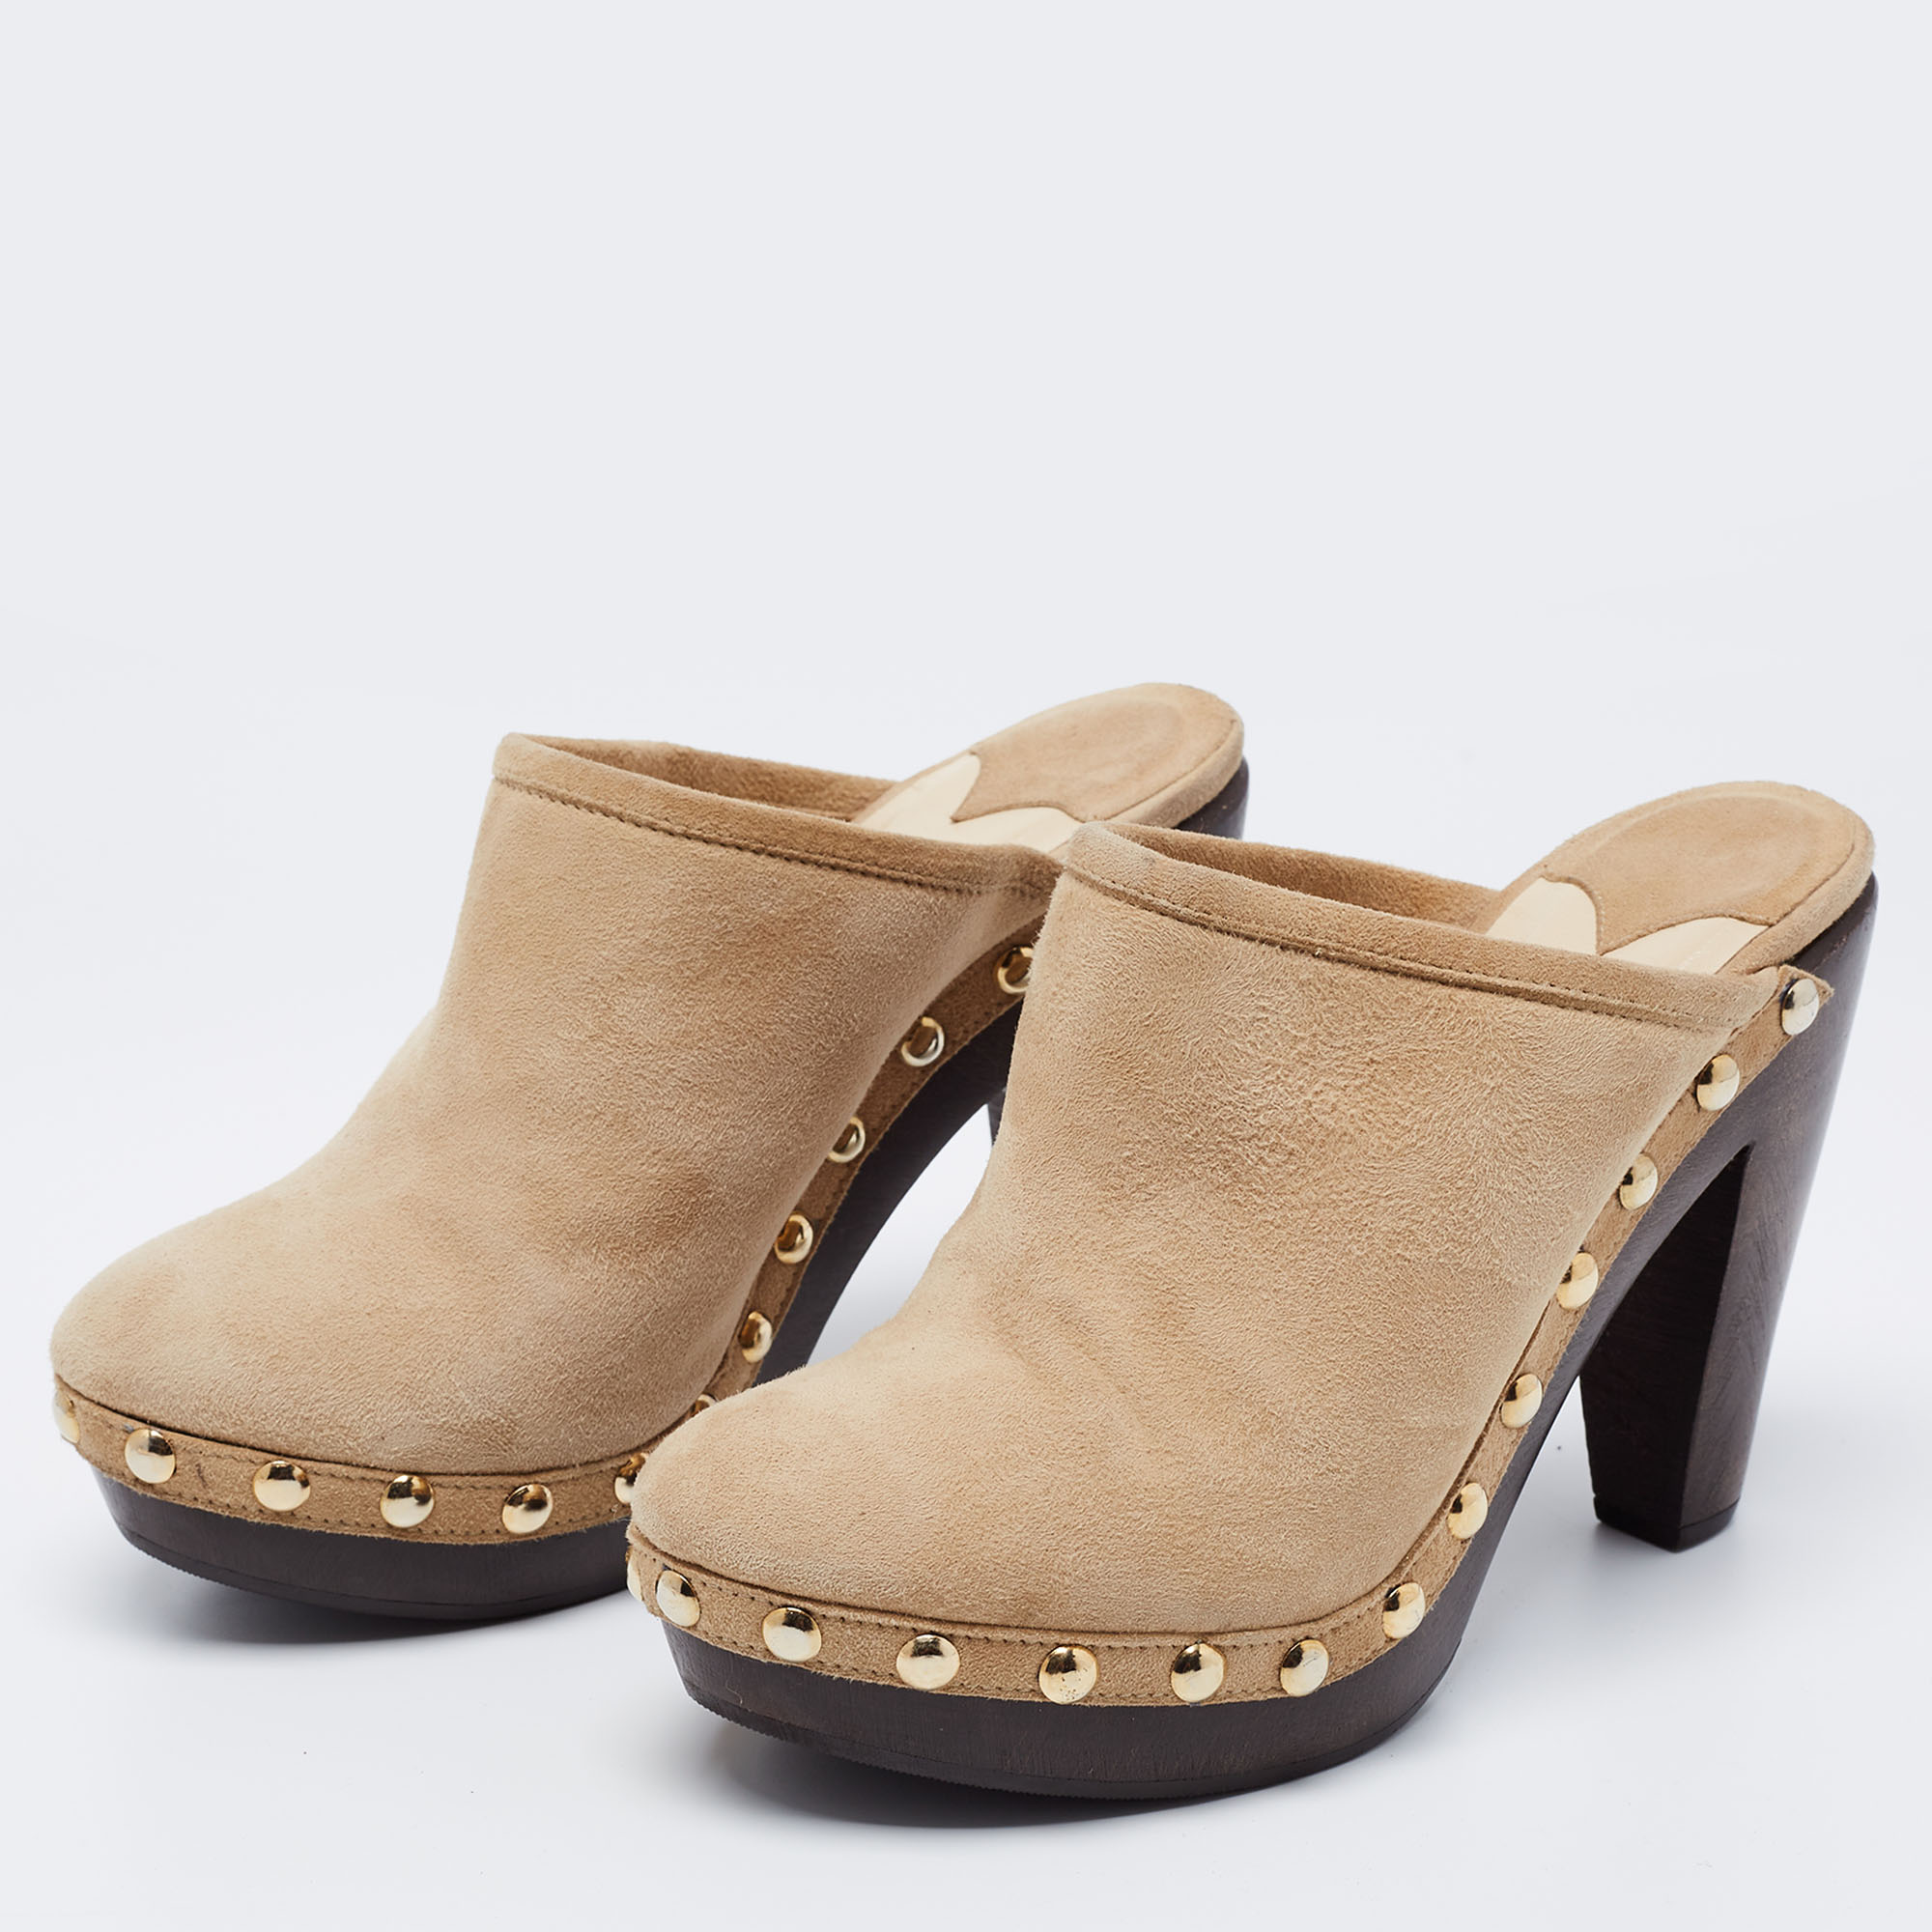 Jimmy Choo Beige Suede Studded Mules Size